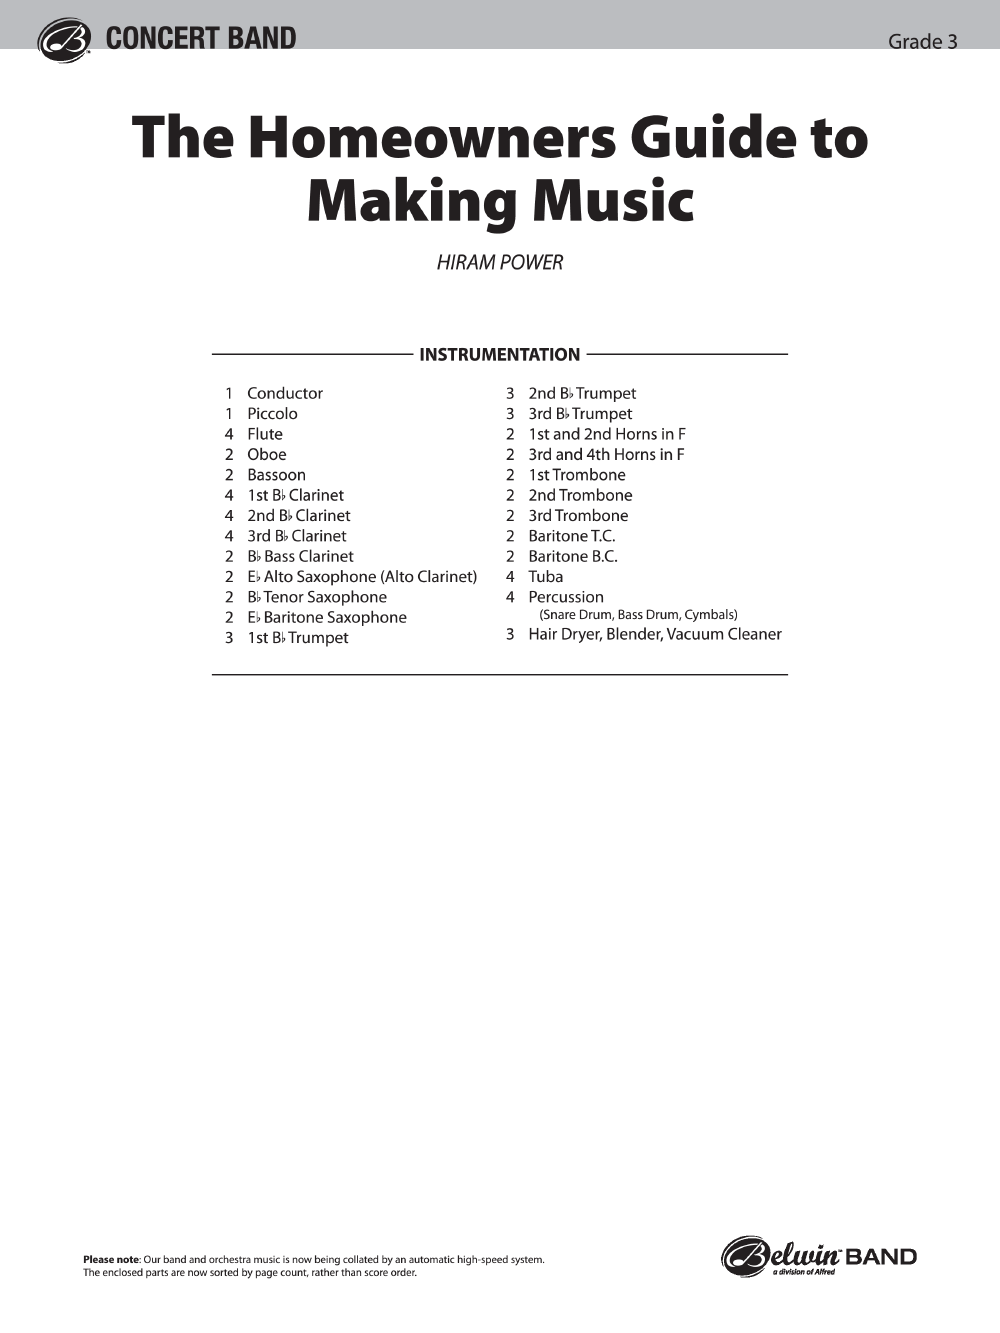 HOMEOWNERS GUIDE TO MAKING MUSIC SCORE